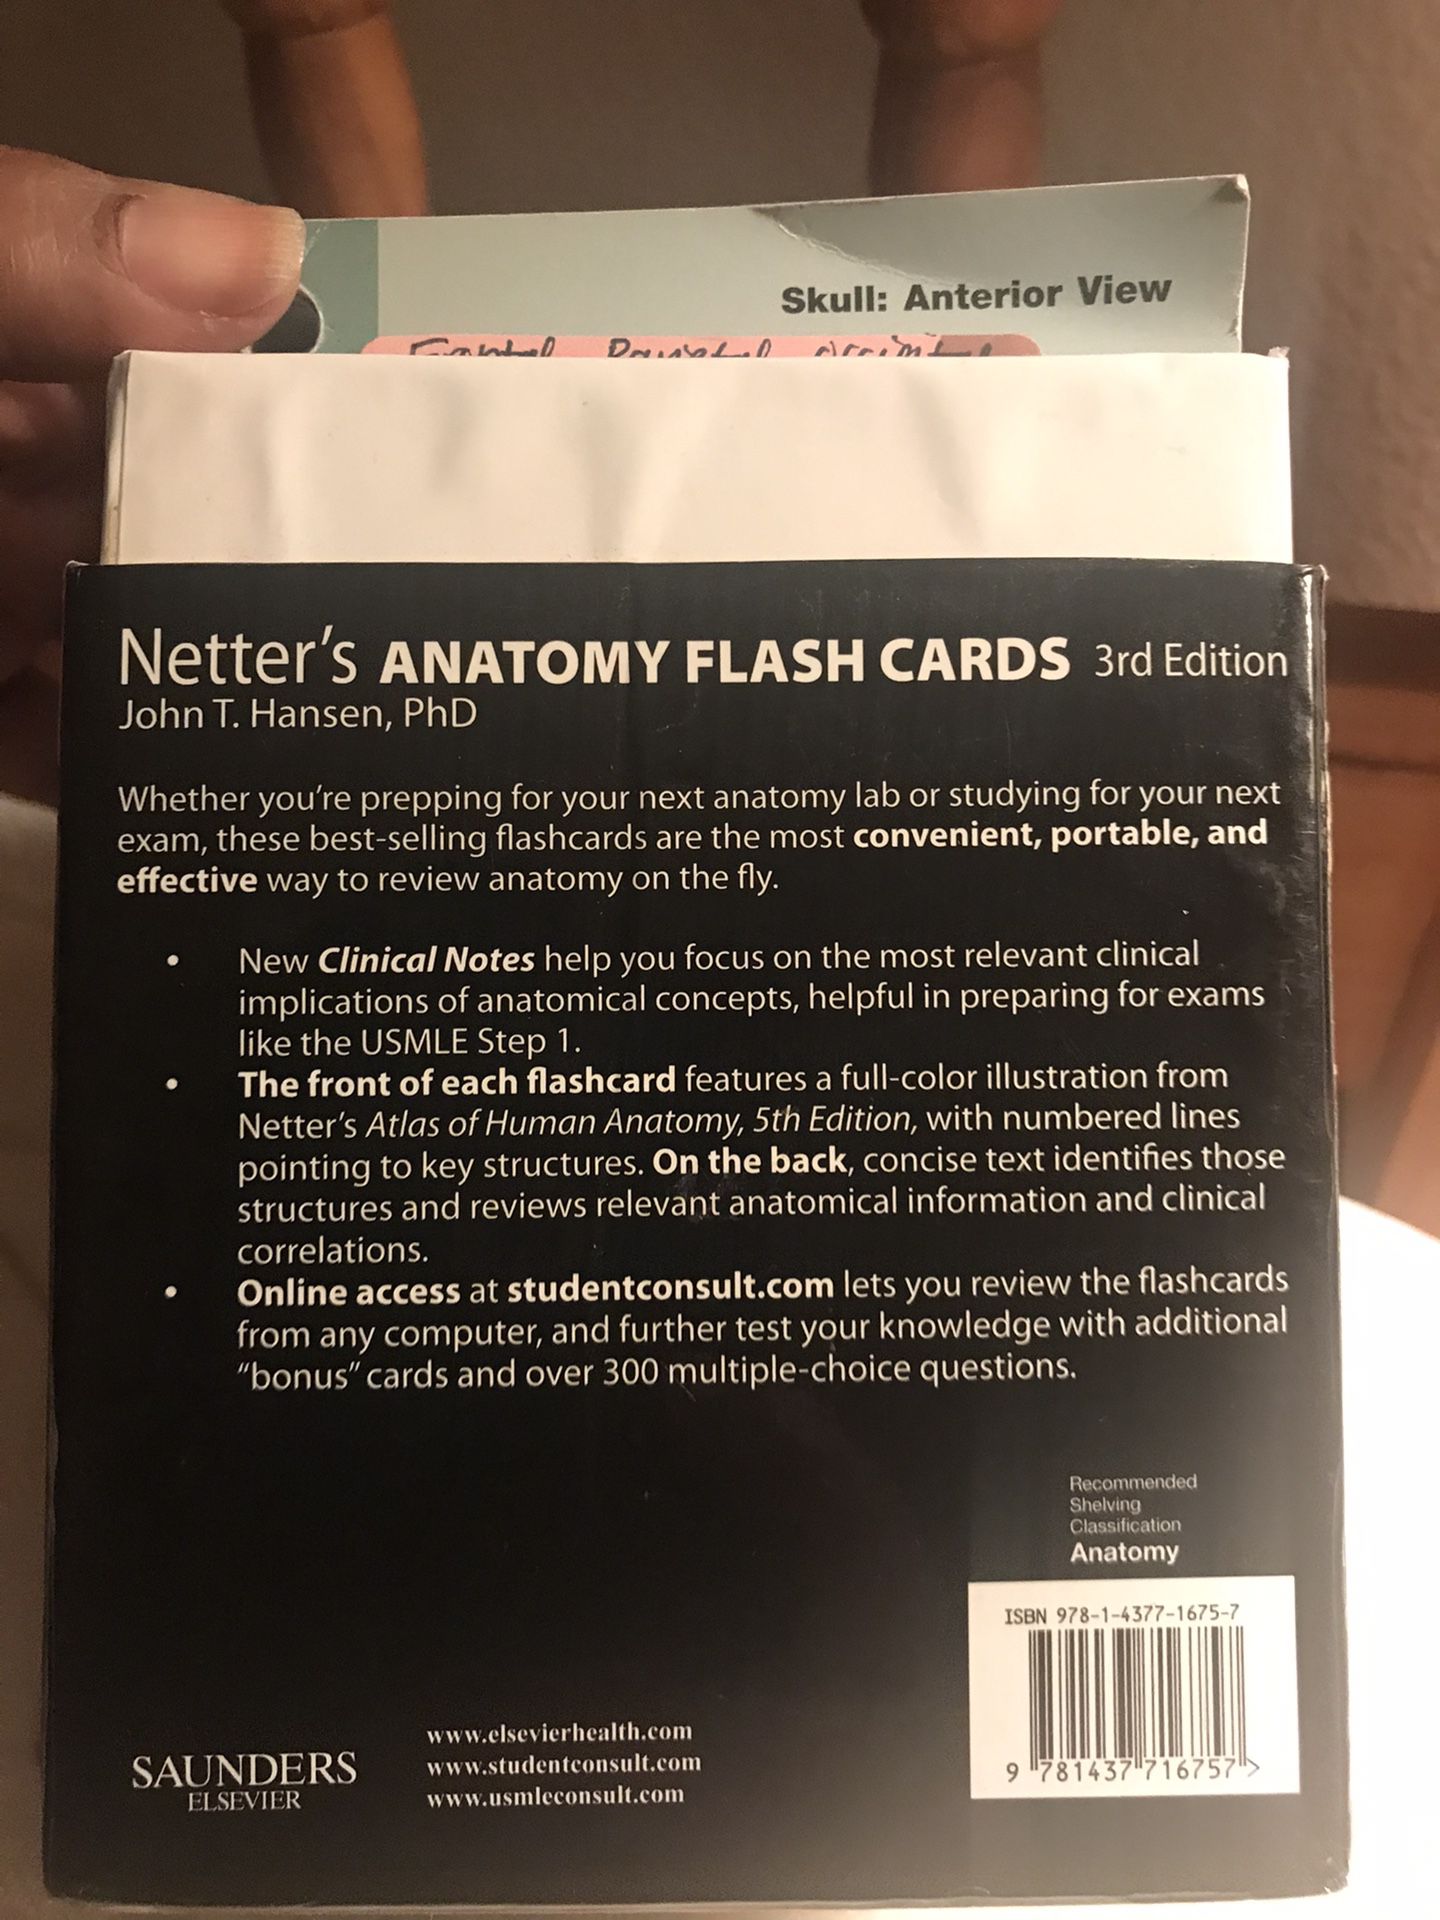 Netter’s Anatomy Flash Cards. 3rd edition